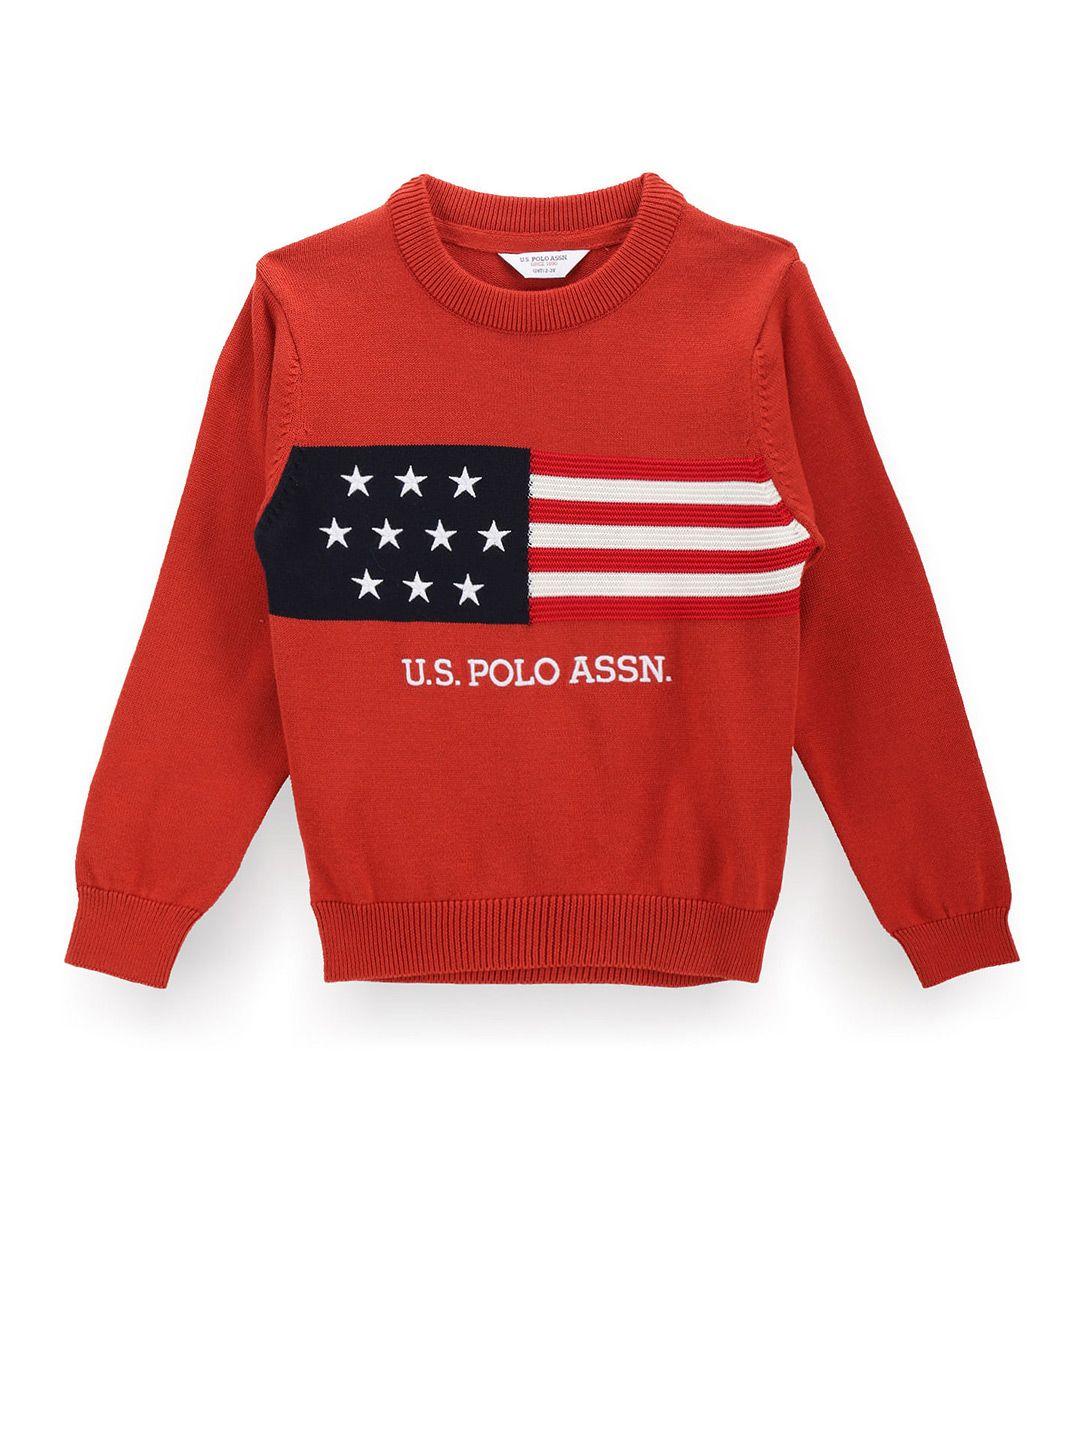 u.s.-polo-assn.-kids-boys-printed-pure-cotton-pullover-sweater